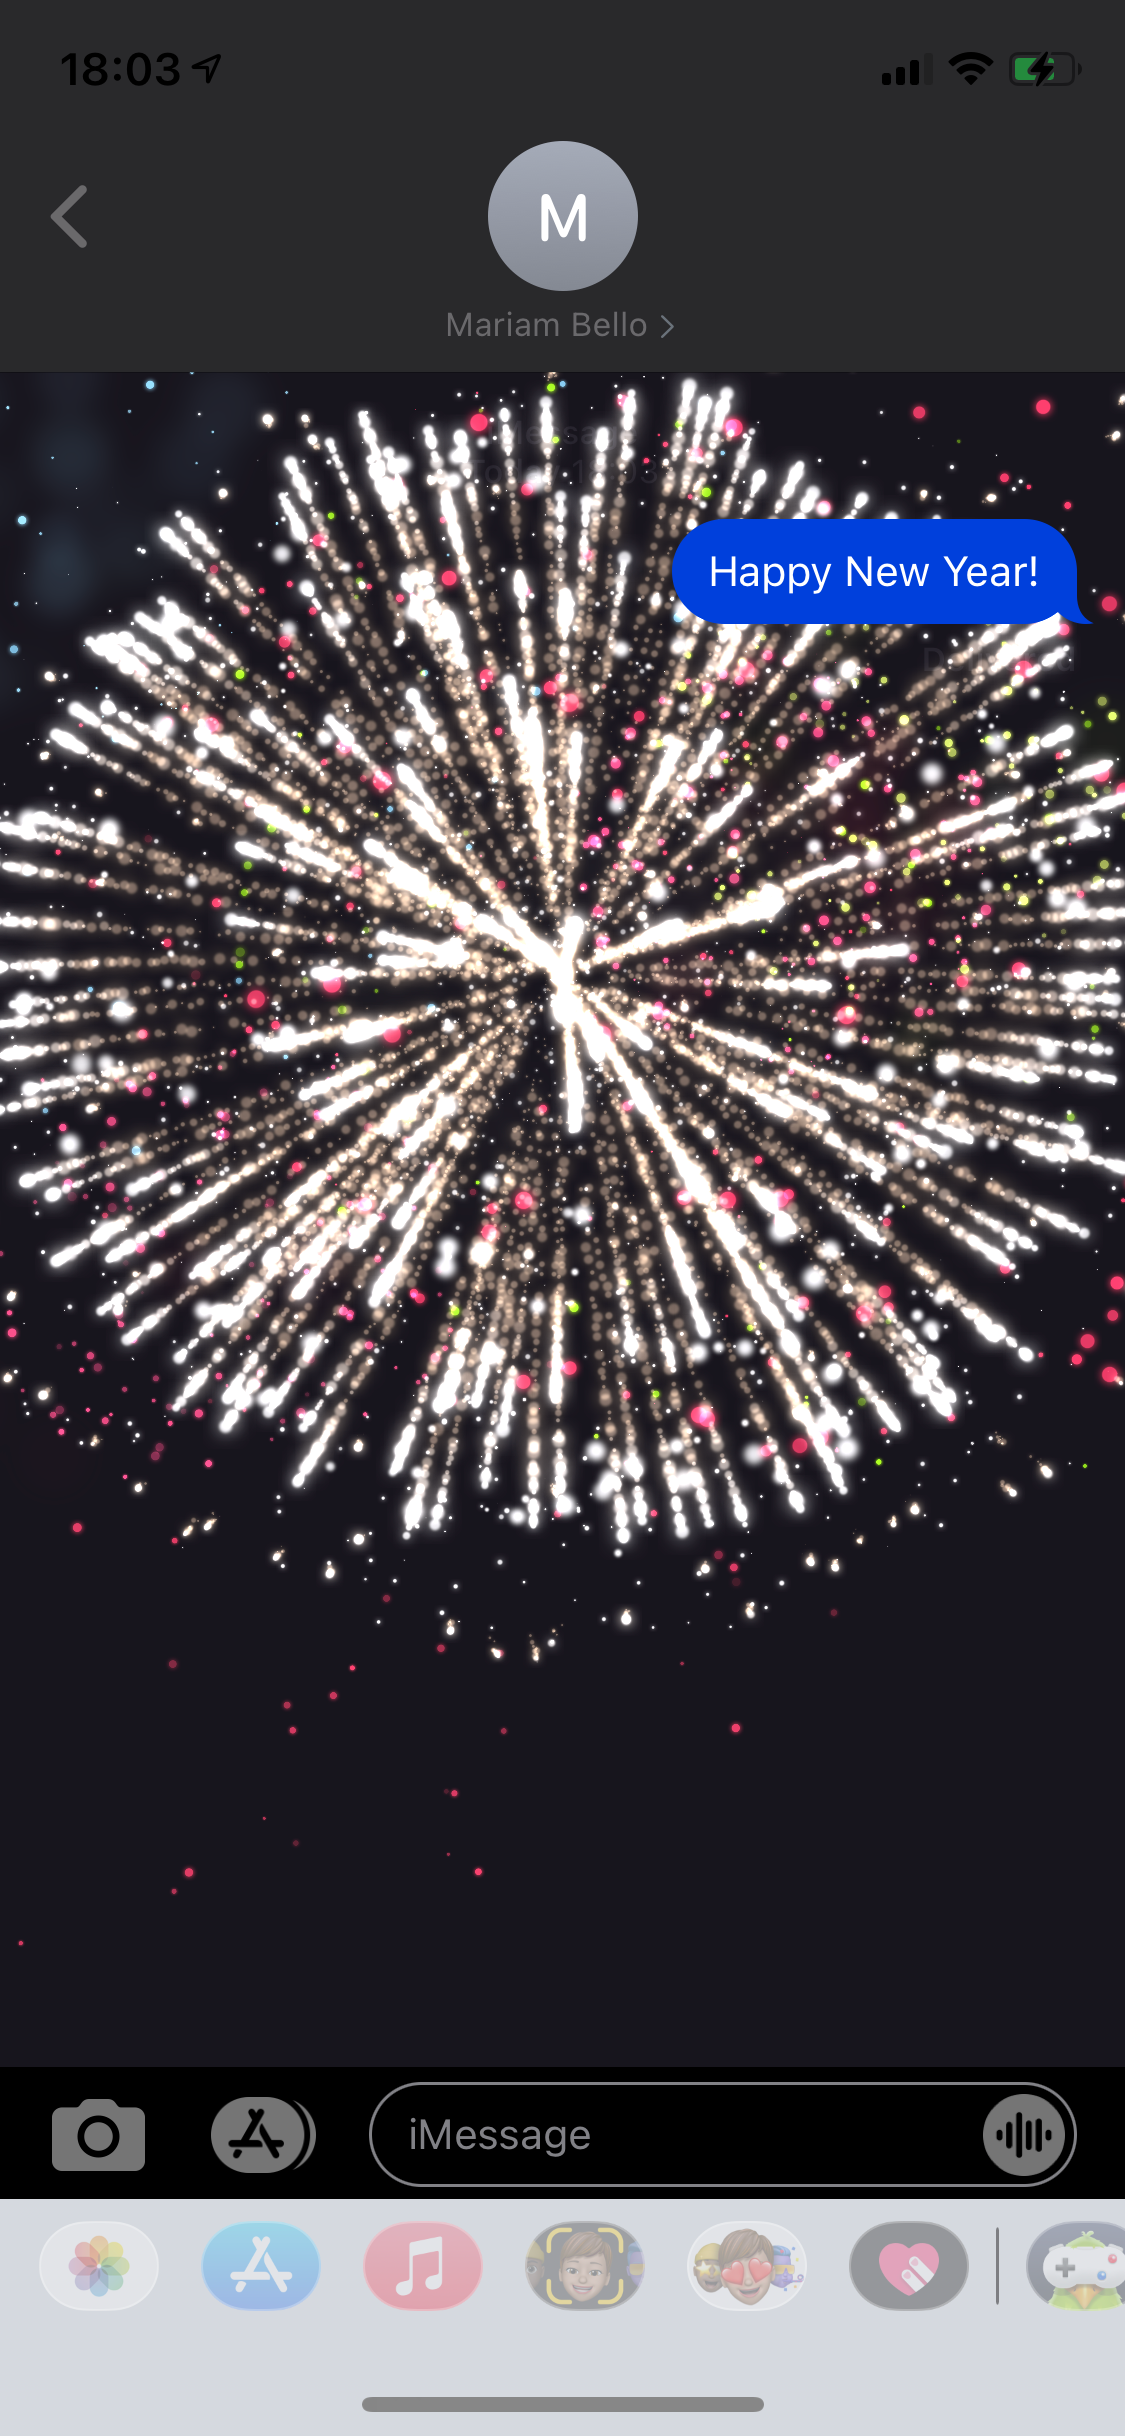 Sending a Happy New Year message triggers the Fireworks effect